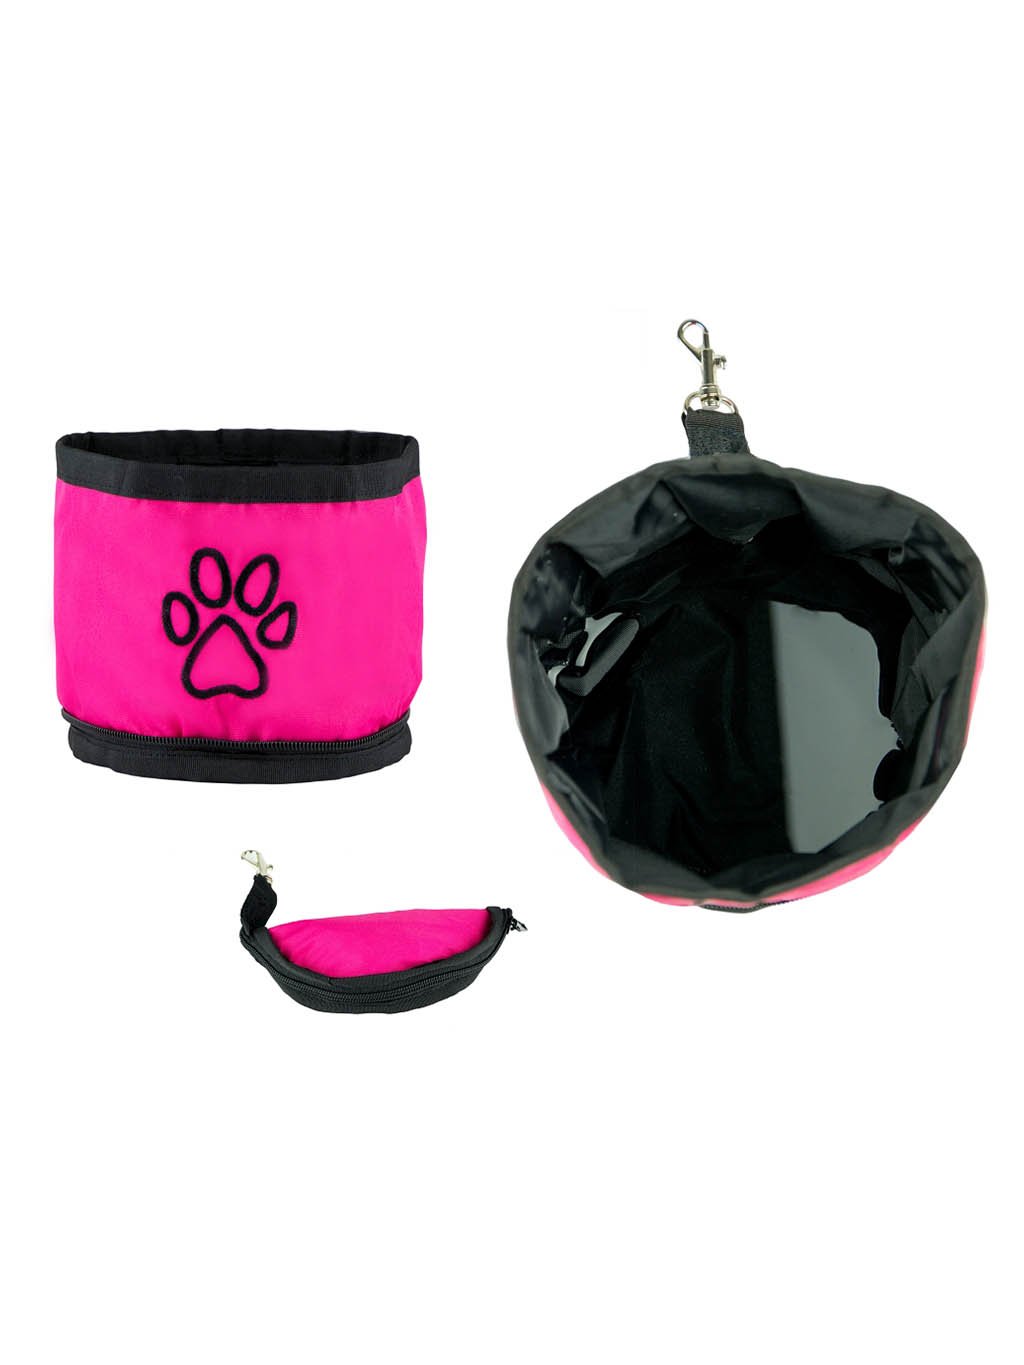 Travel bowl for larger dogs